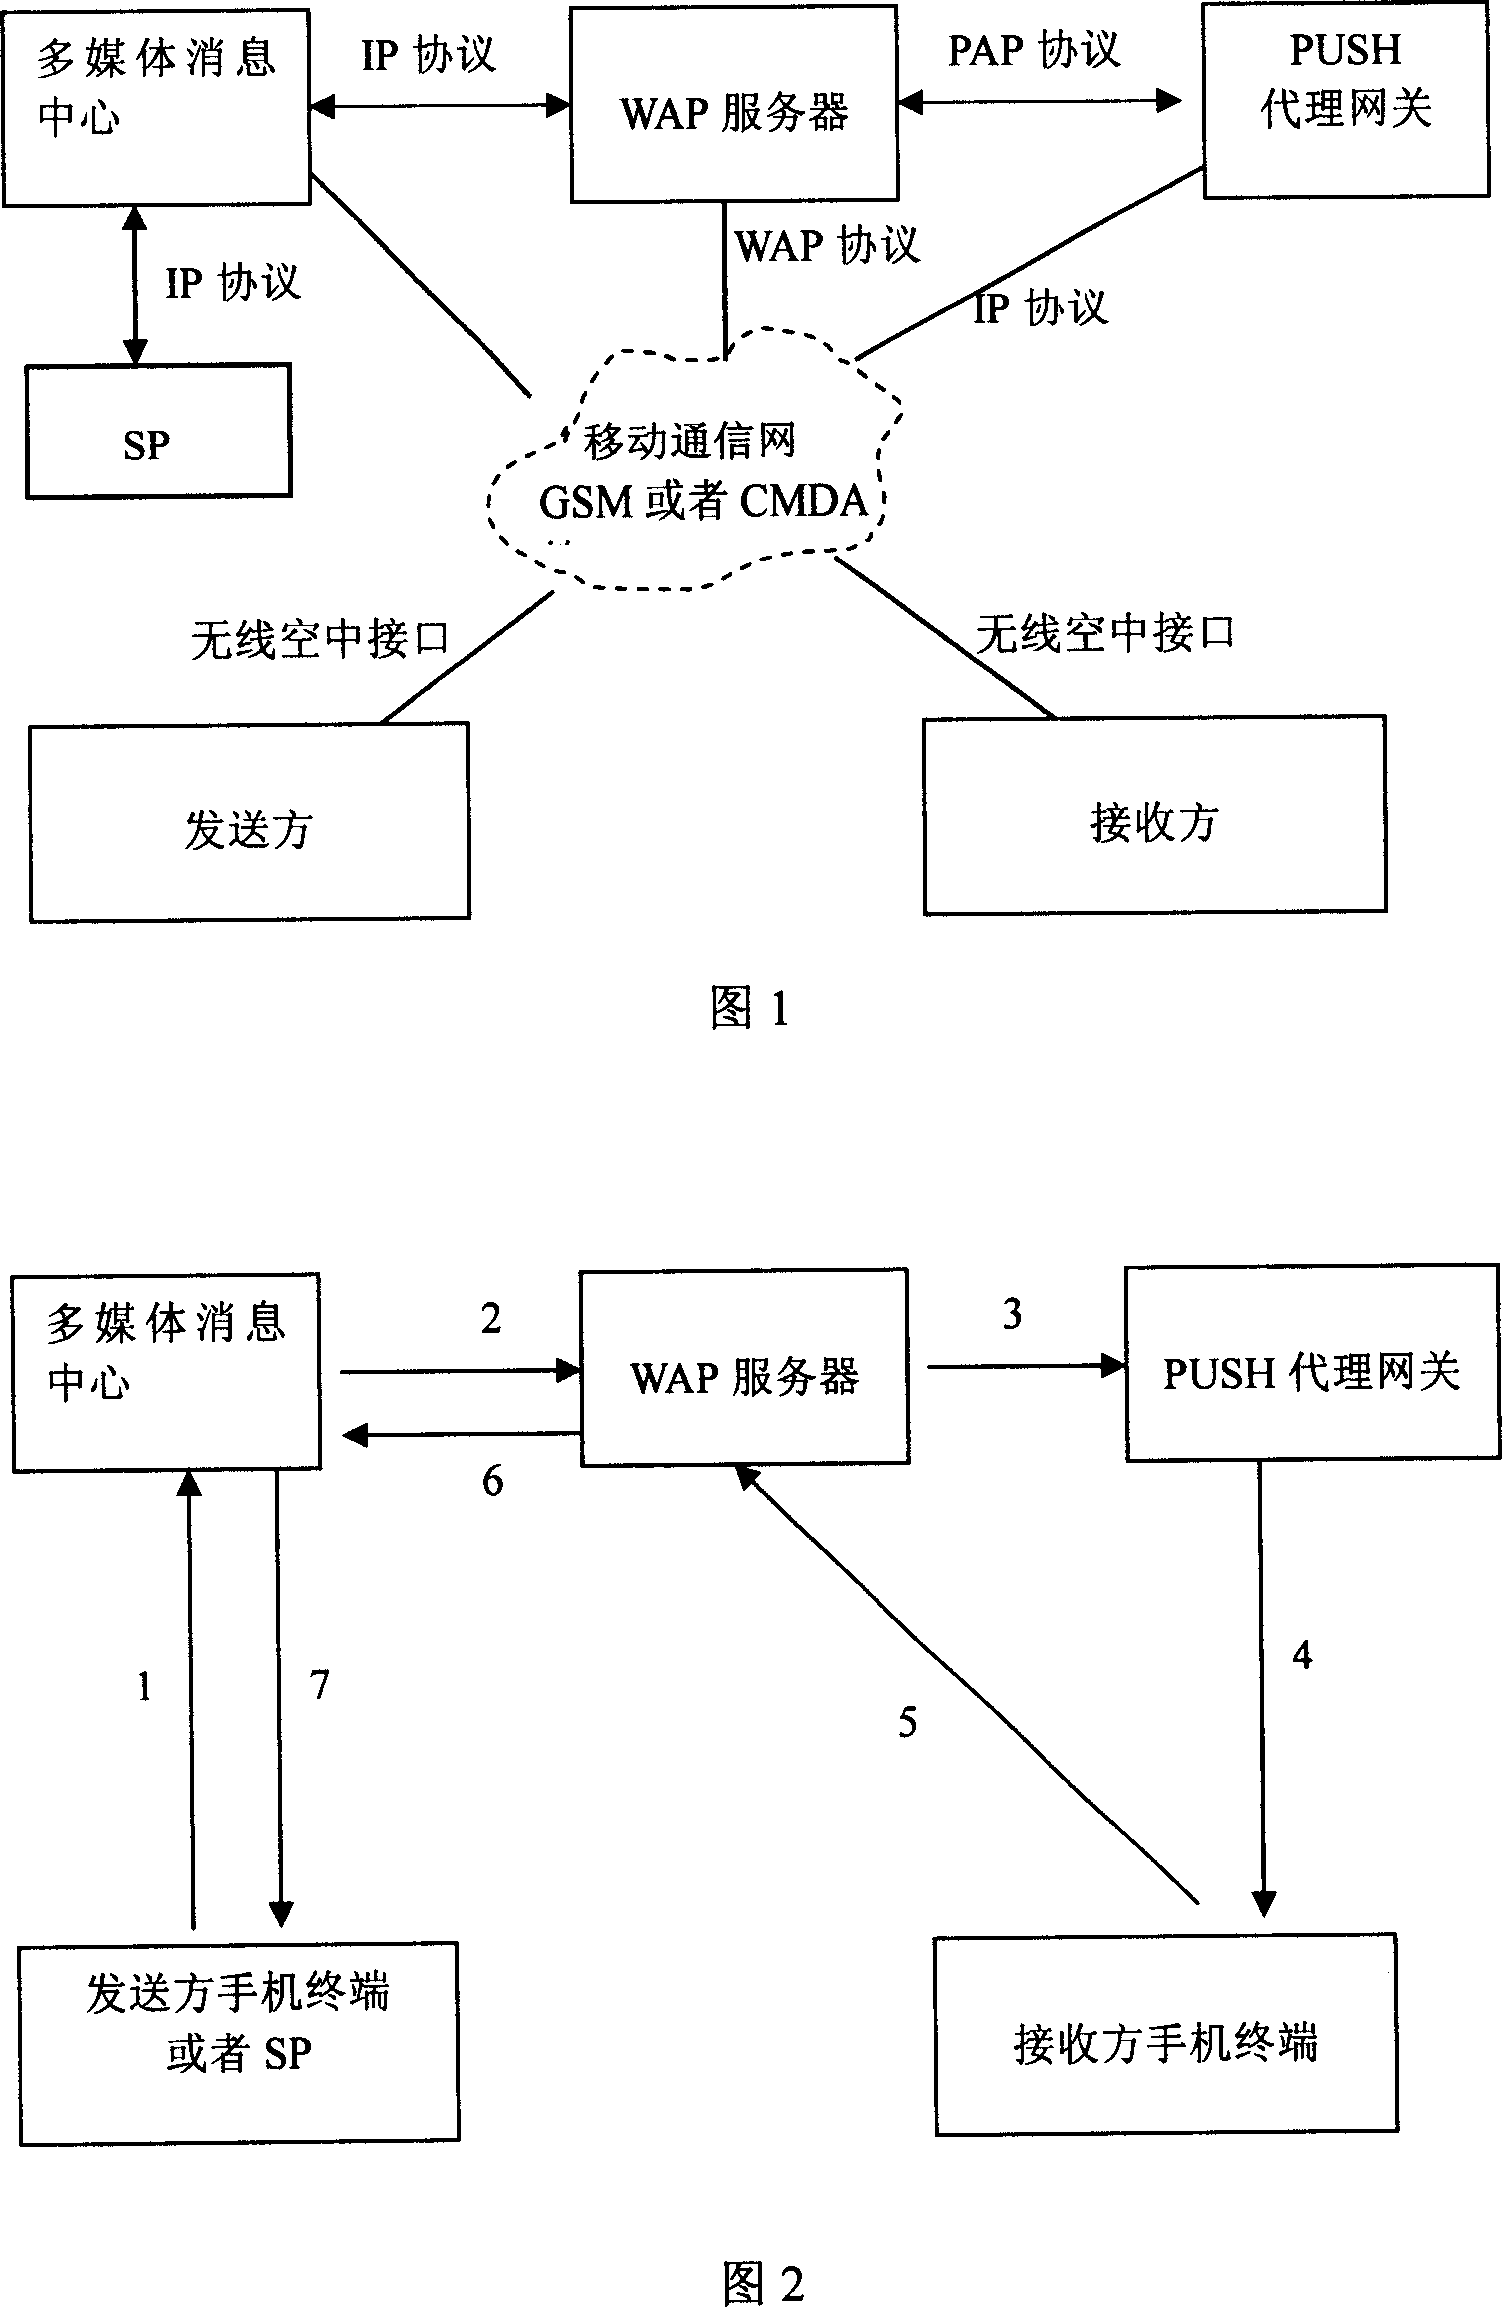 Method for implementing multimedia information content protection